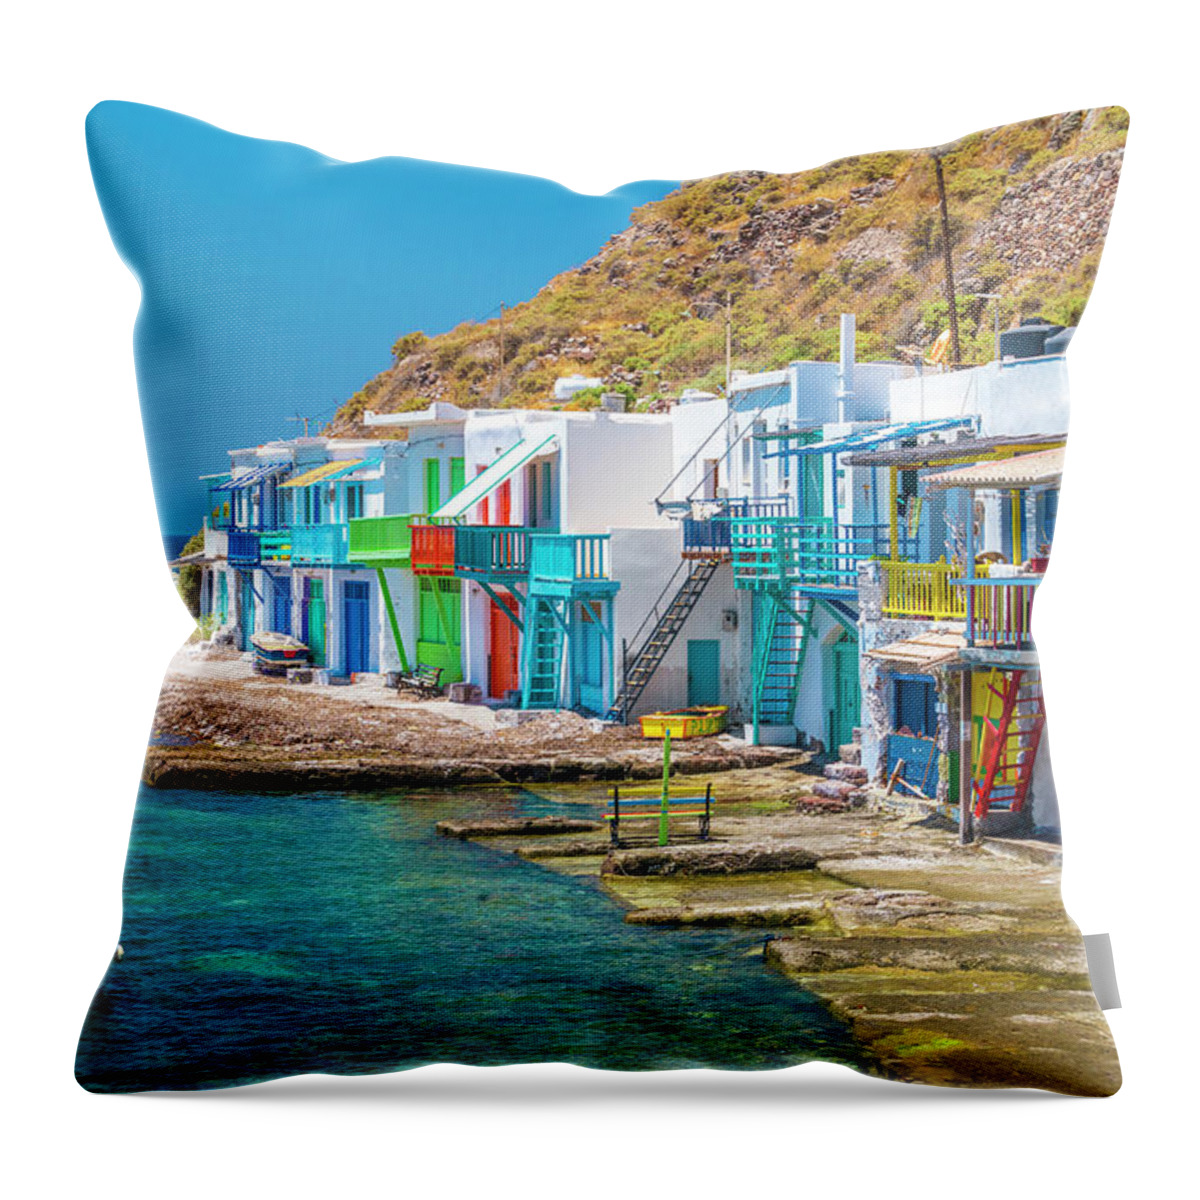 Estock Throw Pillow featuring the digital art Greece, Aegean Islands, Cyclades, Milos Island, Mediterranean Sea, Aegean Sea, Greek Islands, The Tiny Village Of Klima With Traditional Two-story Fishermen Houses by Giorgio Filippini